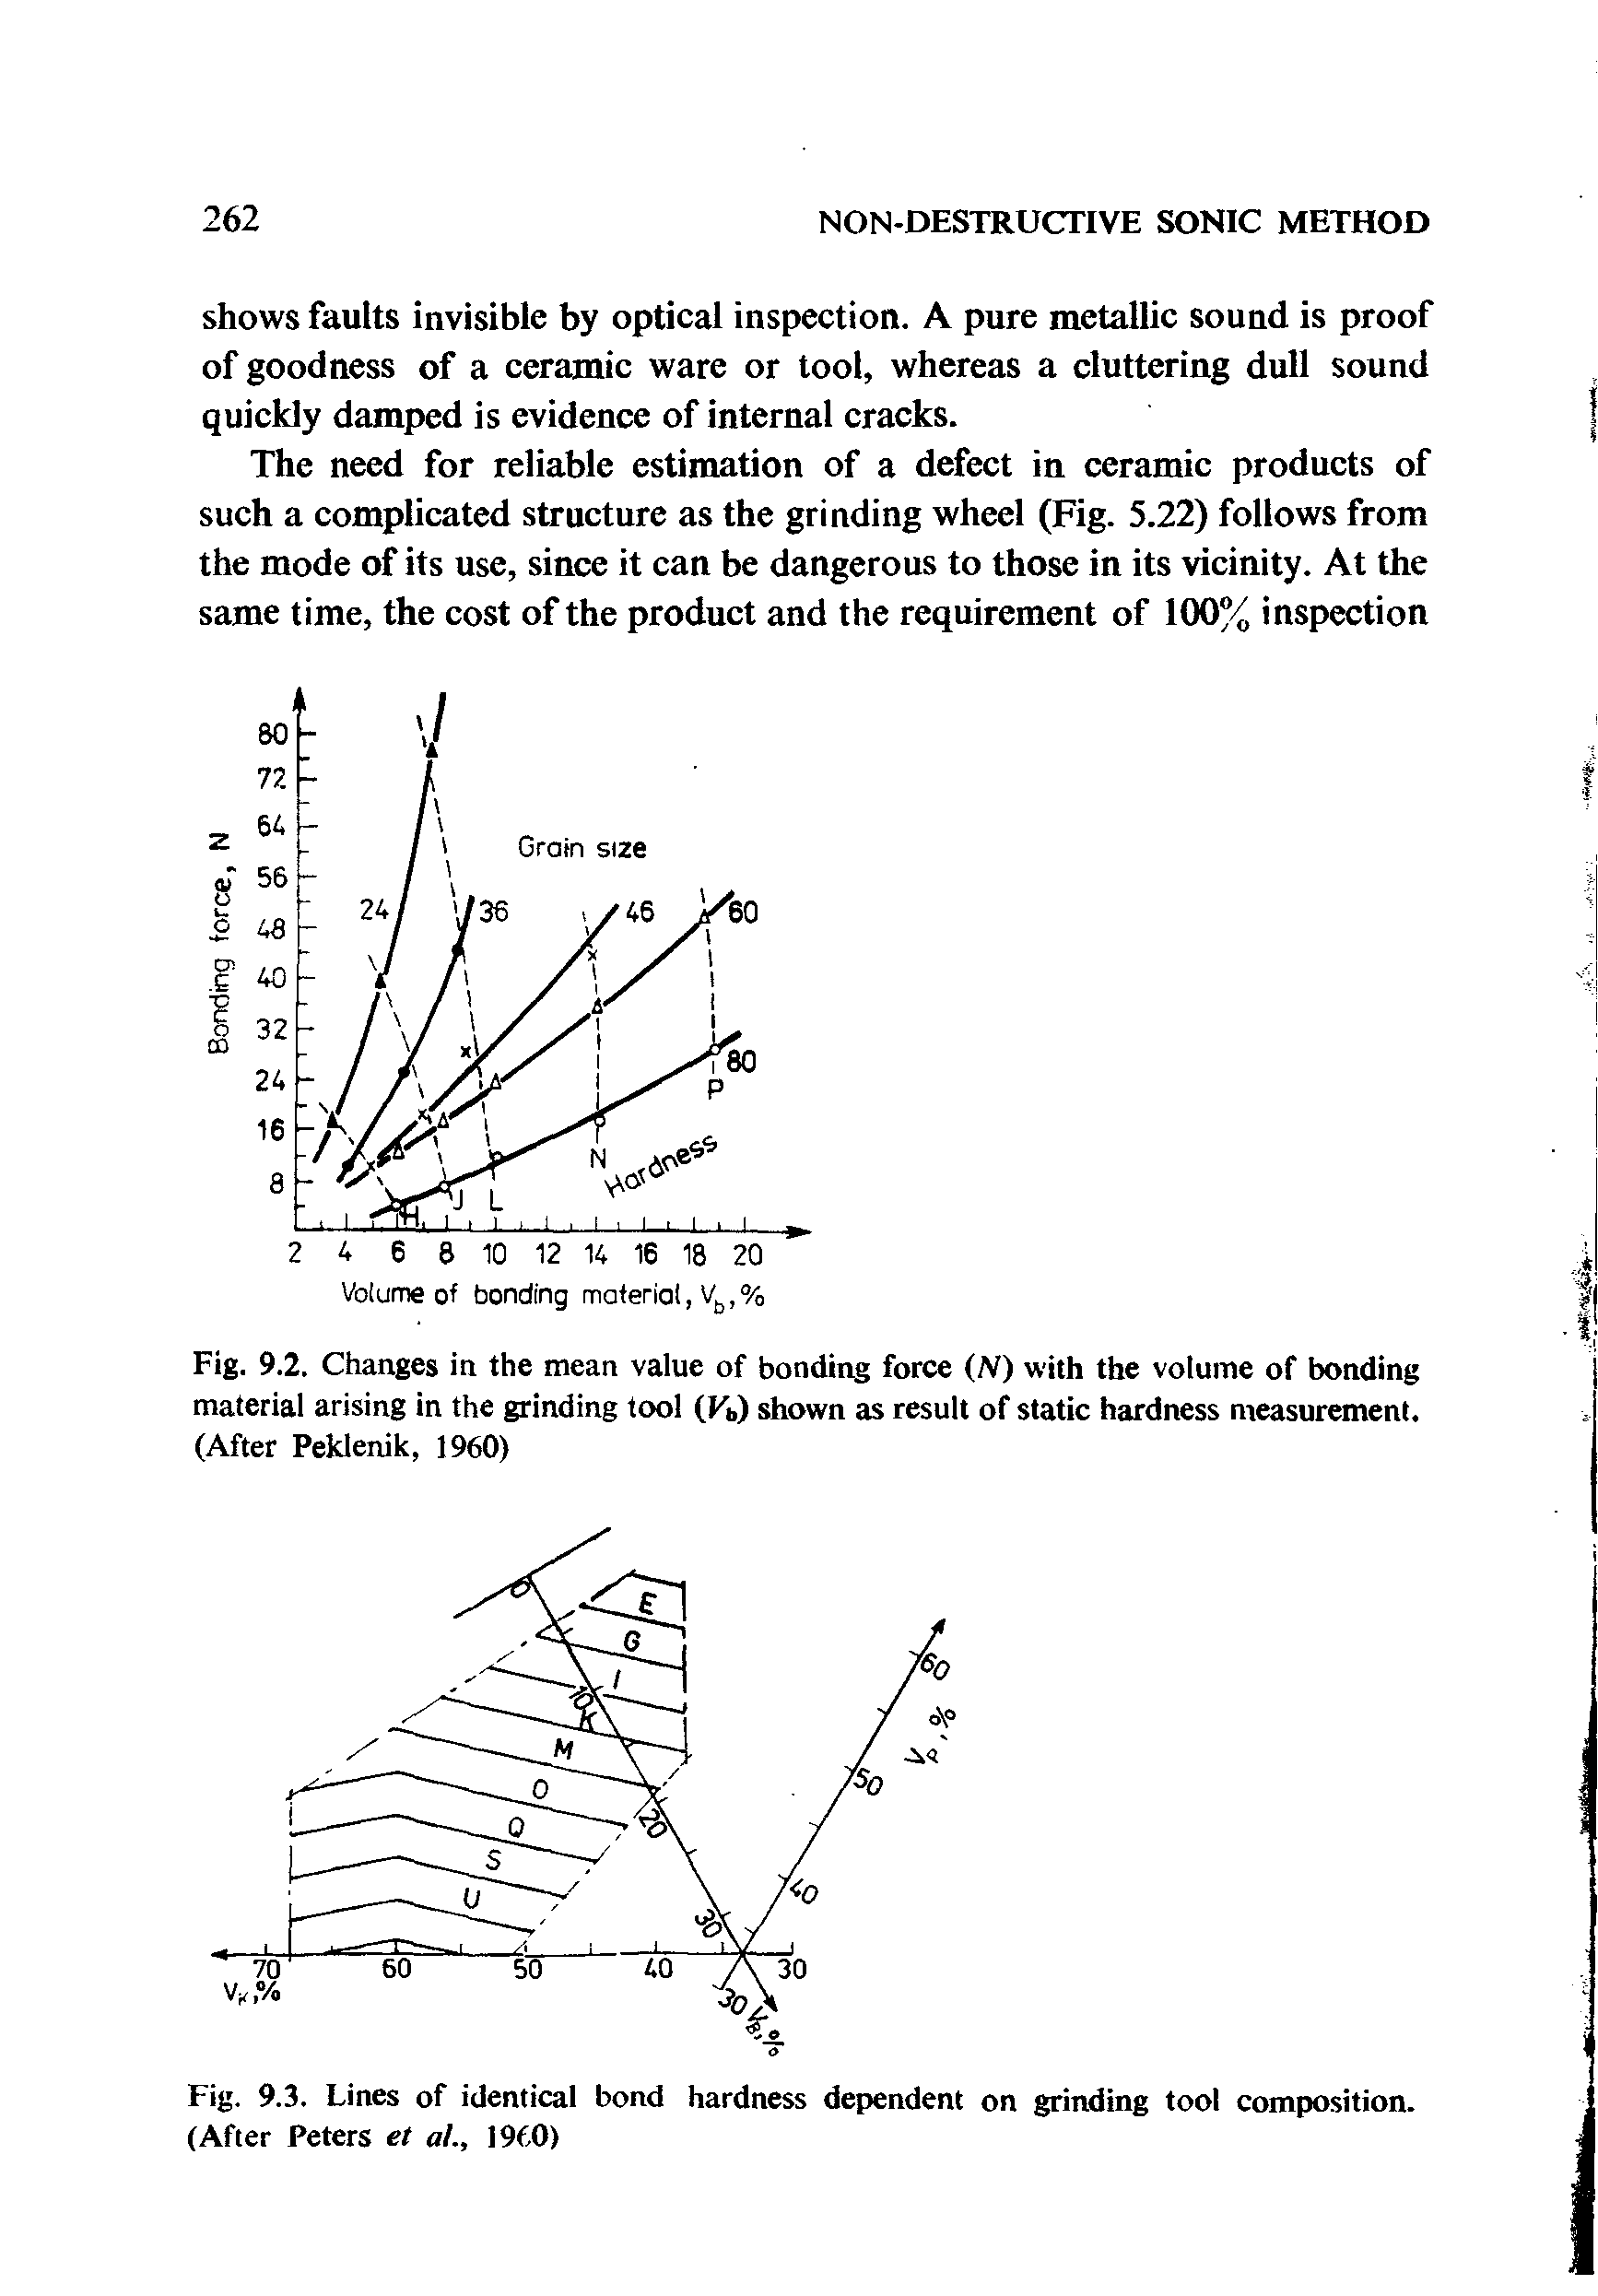 Fig. 9.2. Changes in the mean value of bonding force (N) with the volume of bonding material arising in the grinding tool (Kb) shown as result of static hardness measurement. (After Peklenik, 1960)...